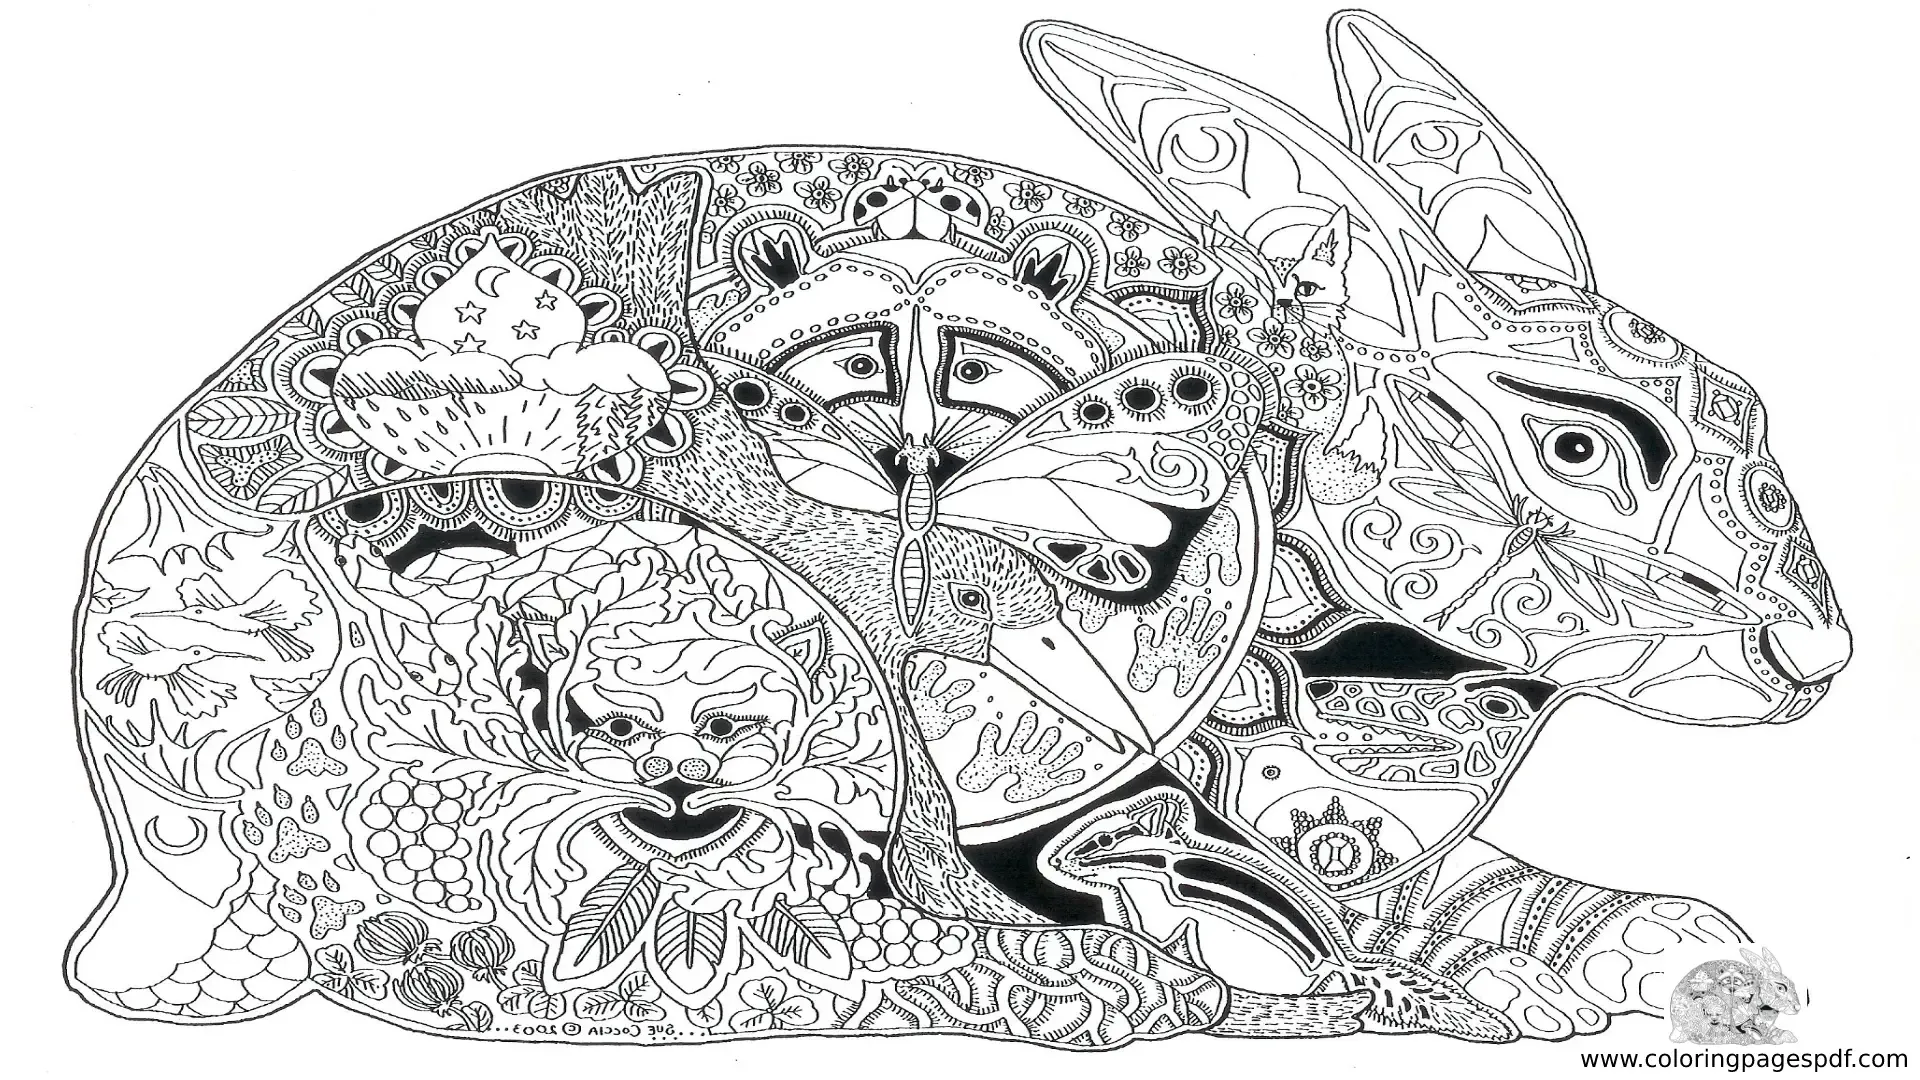 Coloring Pages Of Multiple Animals In A Rabbit Mandala